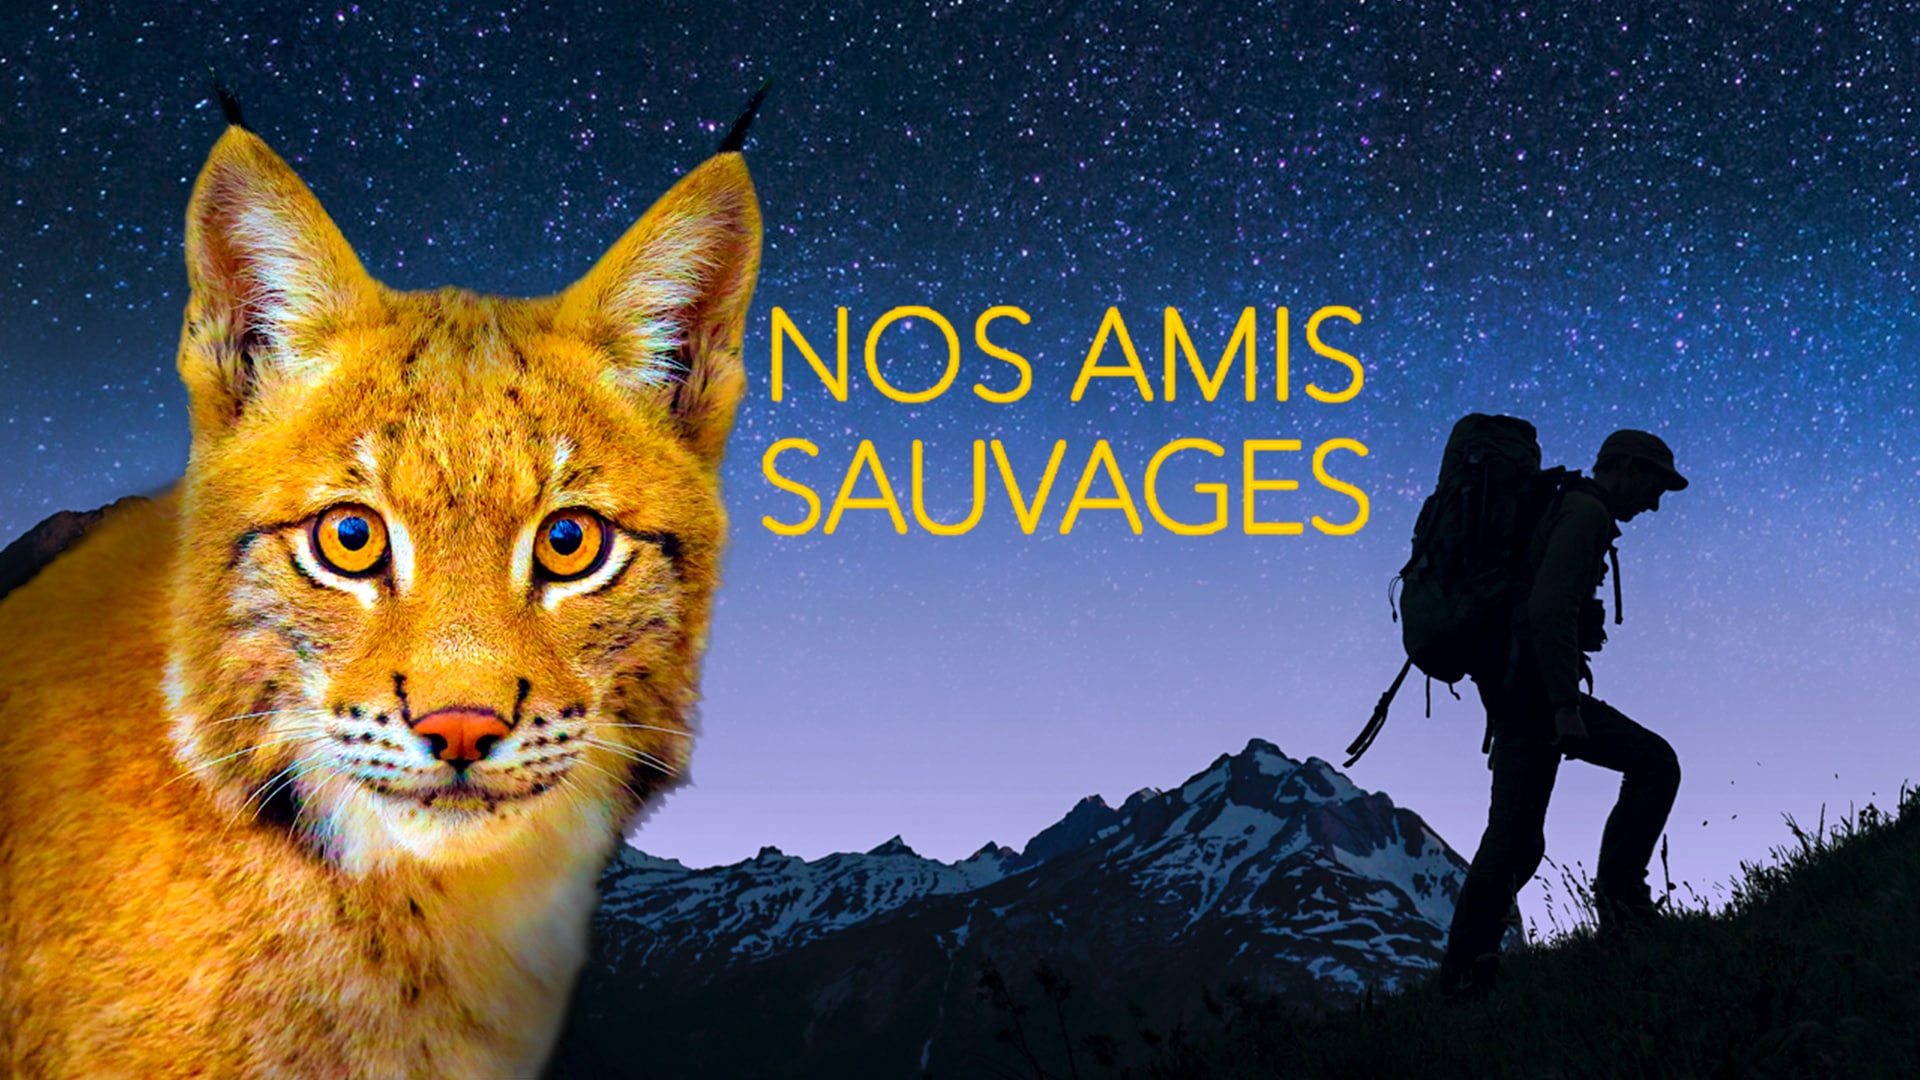 Nos amis sauvages